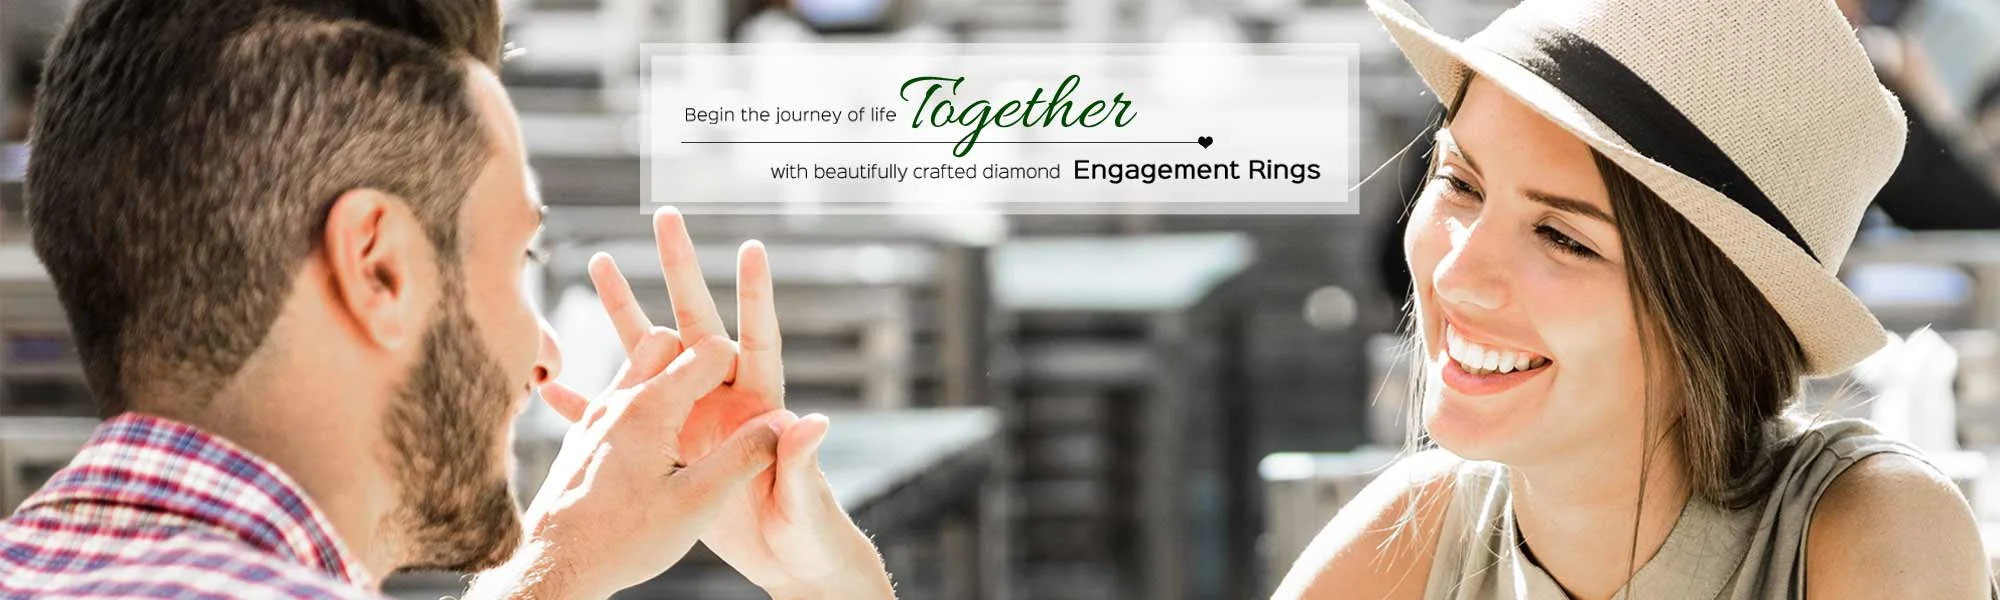 Diamond Engagement Rings Available At K&K Jewelers